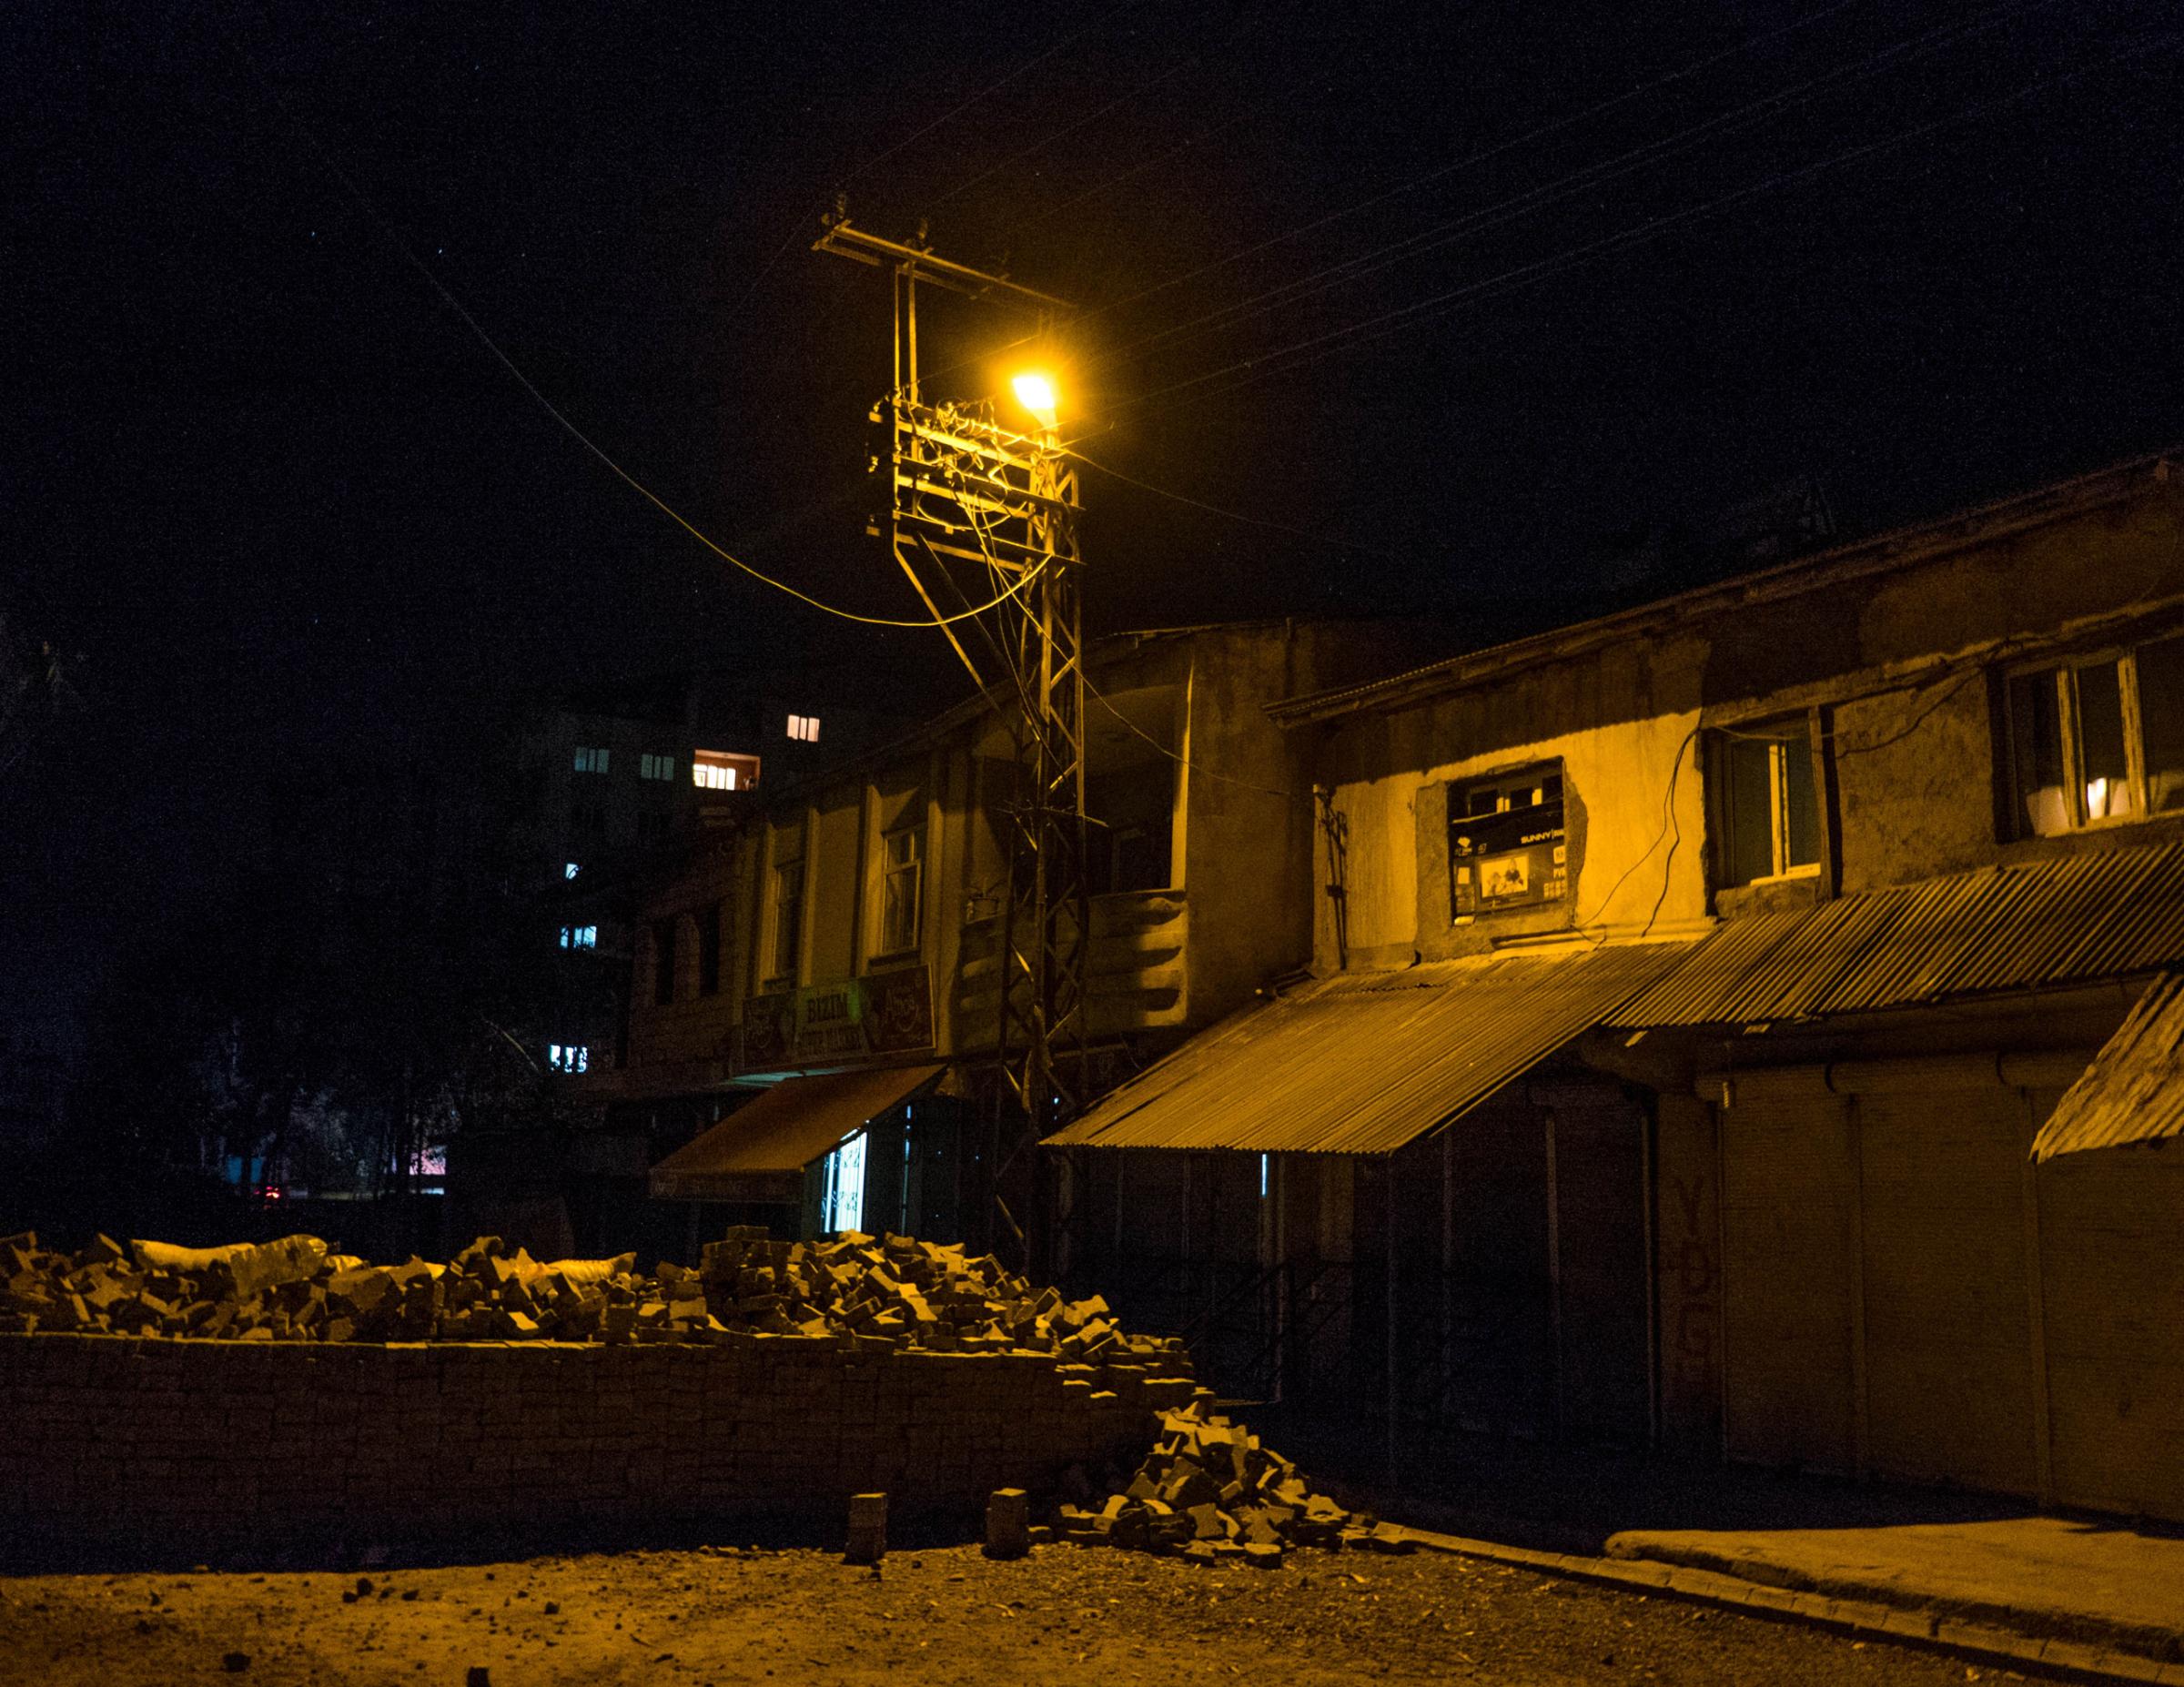 YUKSEKOVA, TURKEY - NOVEMBER 03, 2015: Barricades in Cumhuriyet, a self declared autonomous neighborhood in Yuksekova. Since July several neighborhoods in the city have declared autonomy and built self-rules, with groups of young Kurds who have taken up arms and raise barricades to prevent the advances of the Turkish forces.